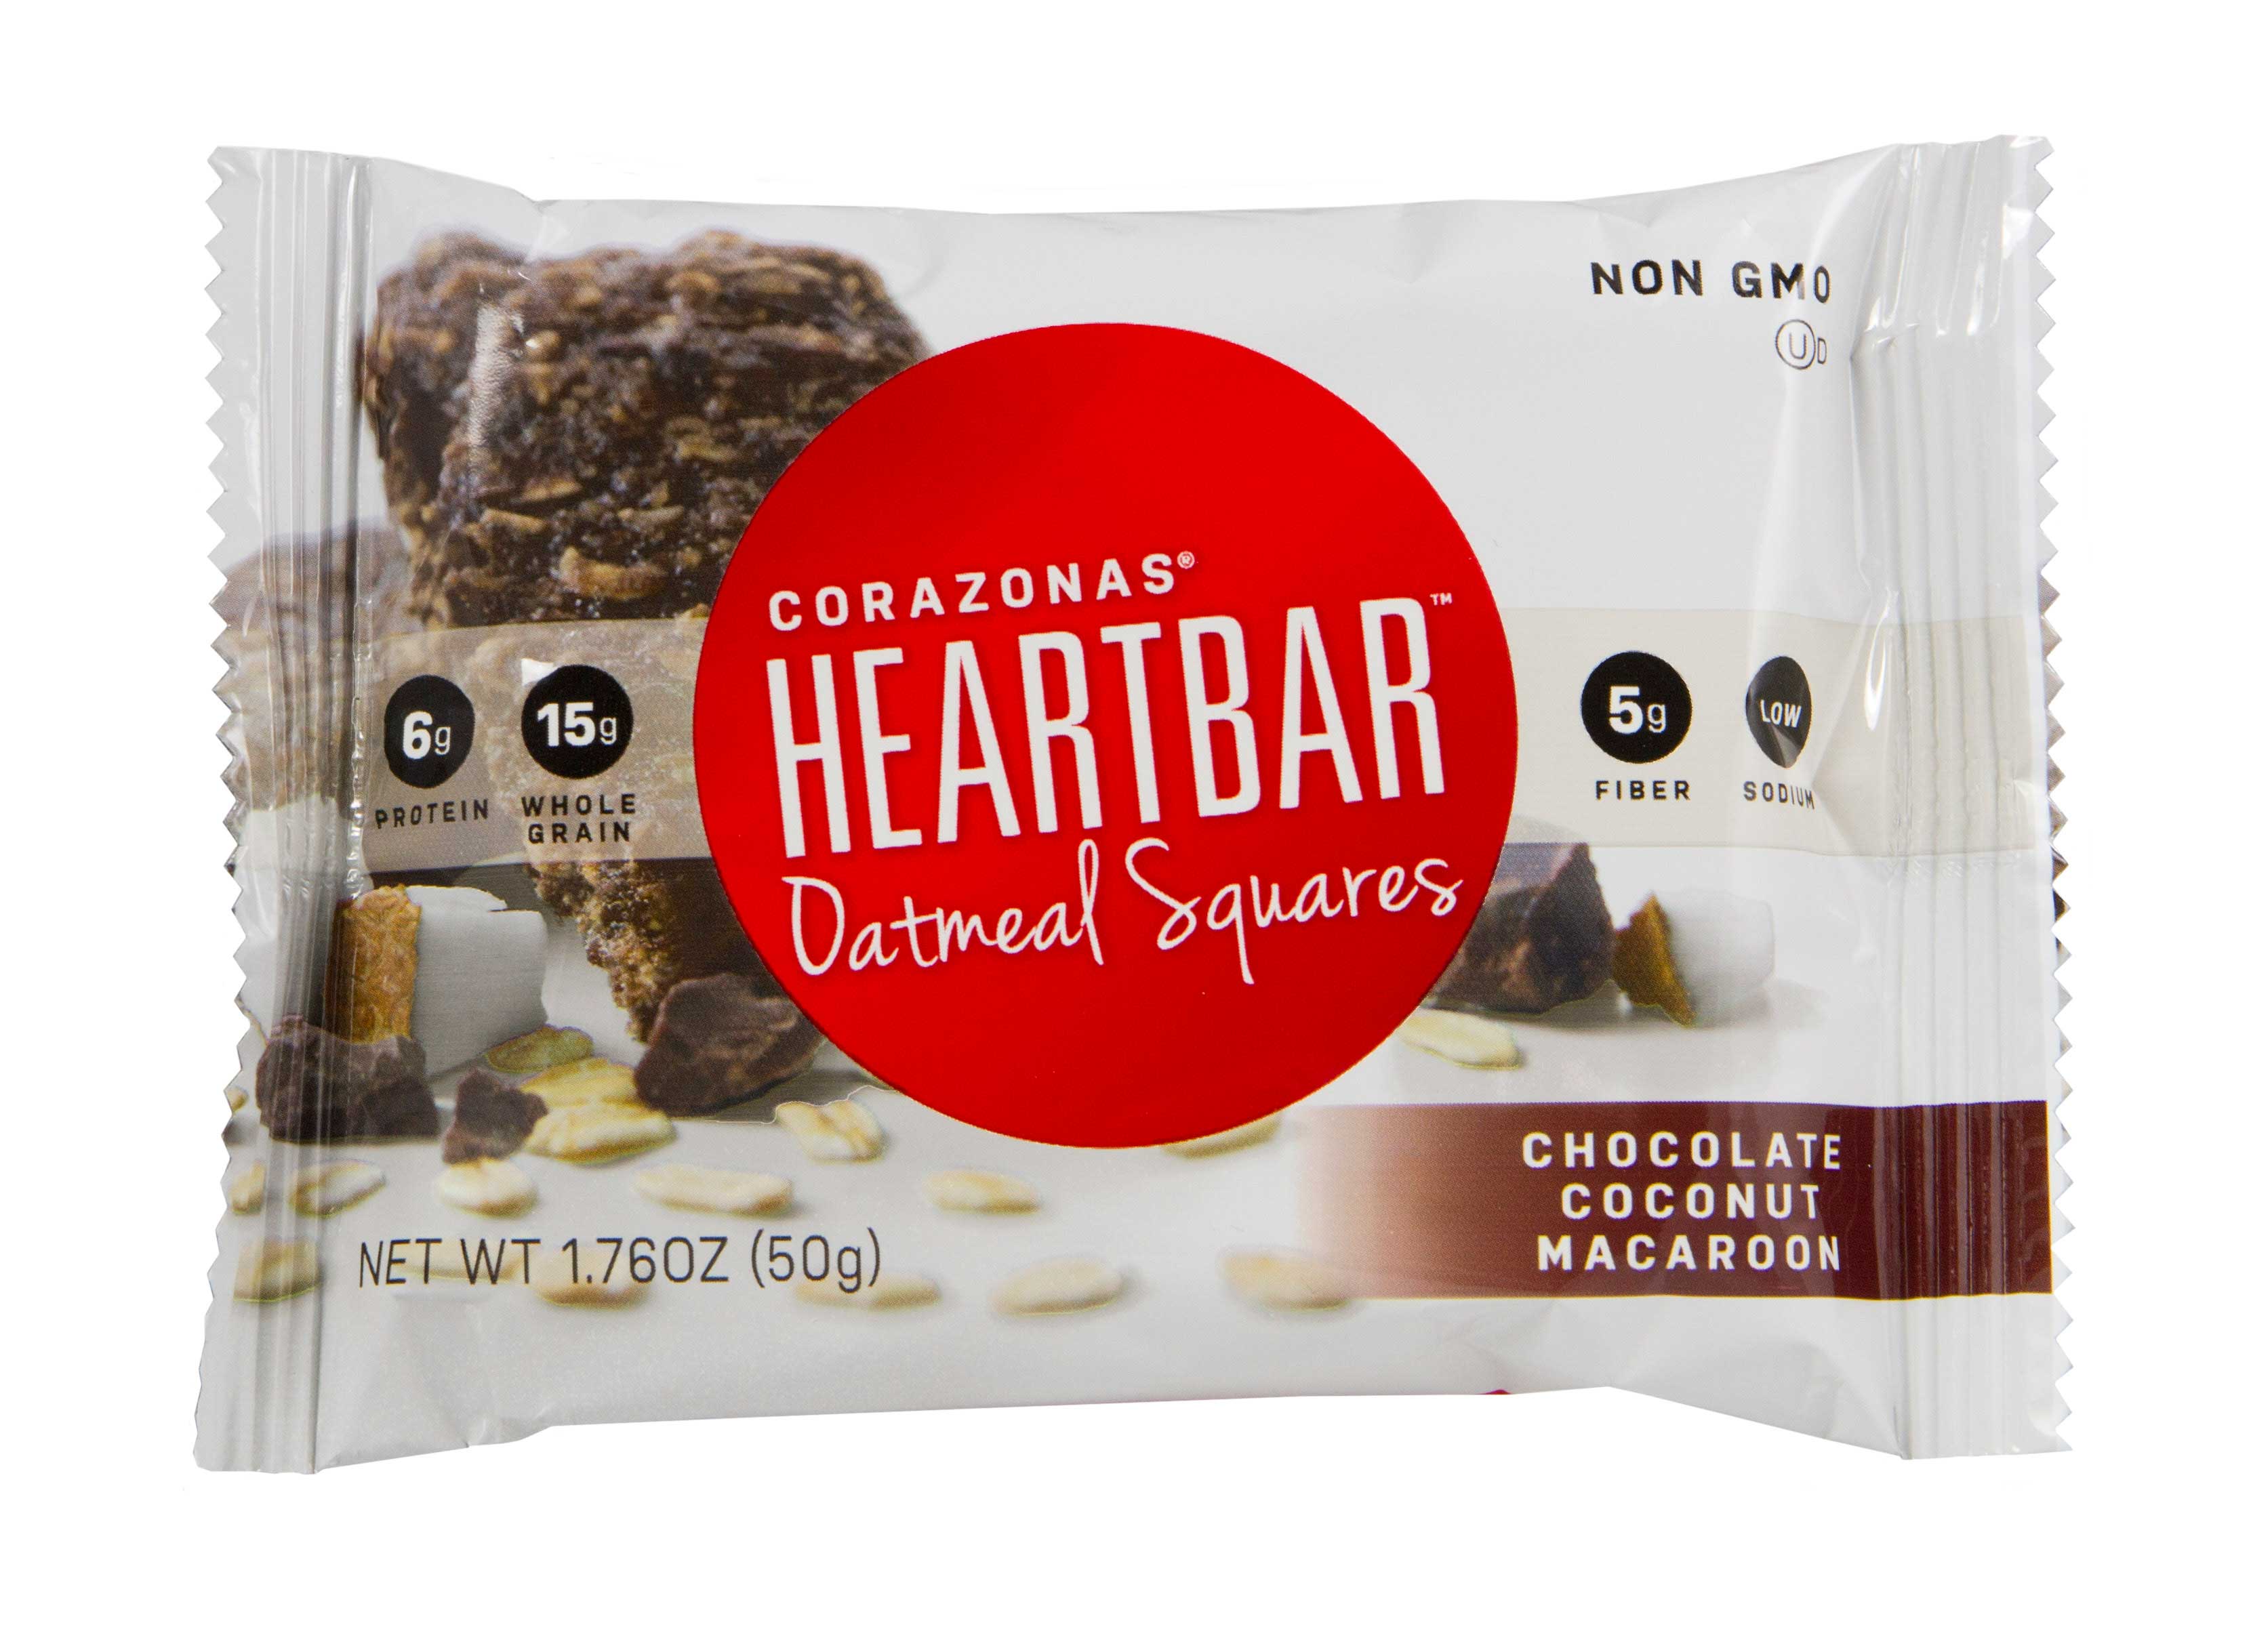 Corazonas Chocolate 1.76 Ounce Coconut Macroon Heartbar, 12 count per pack -- 6 per case.